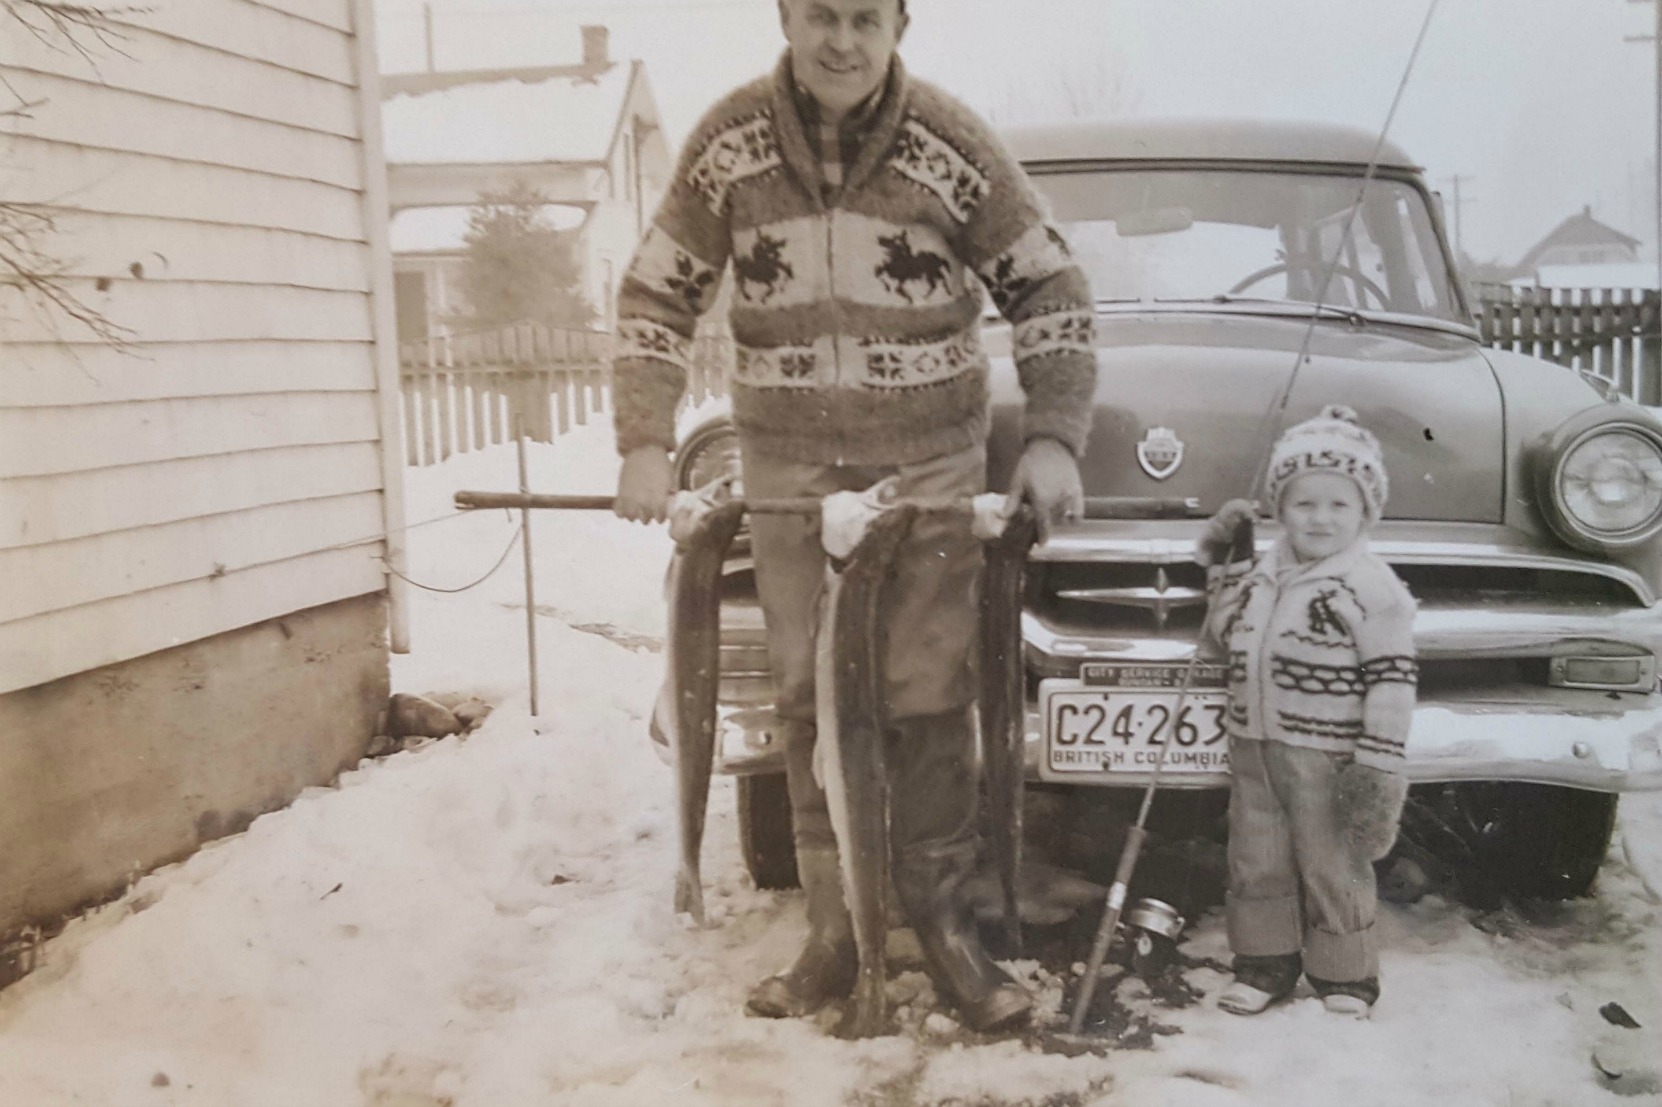 Richard "Bucky" Kennett and his son circa 1954. (photo courtesy of the Kennett family & Bucky's Sport Shop - used with permission)